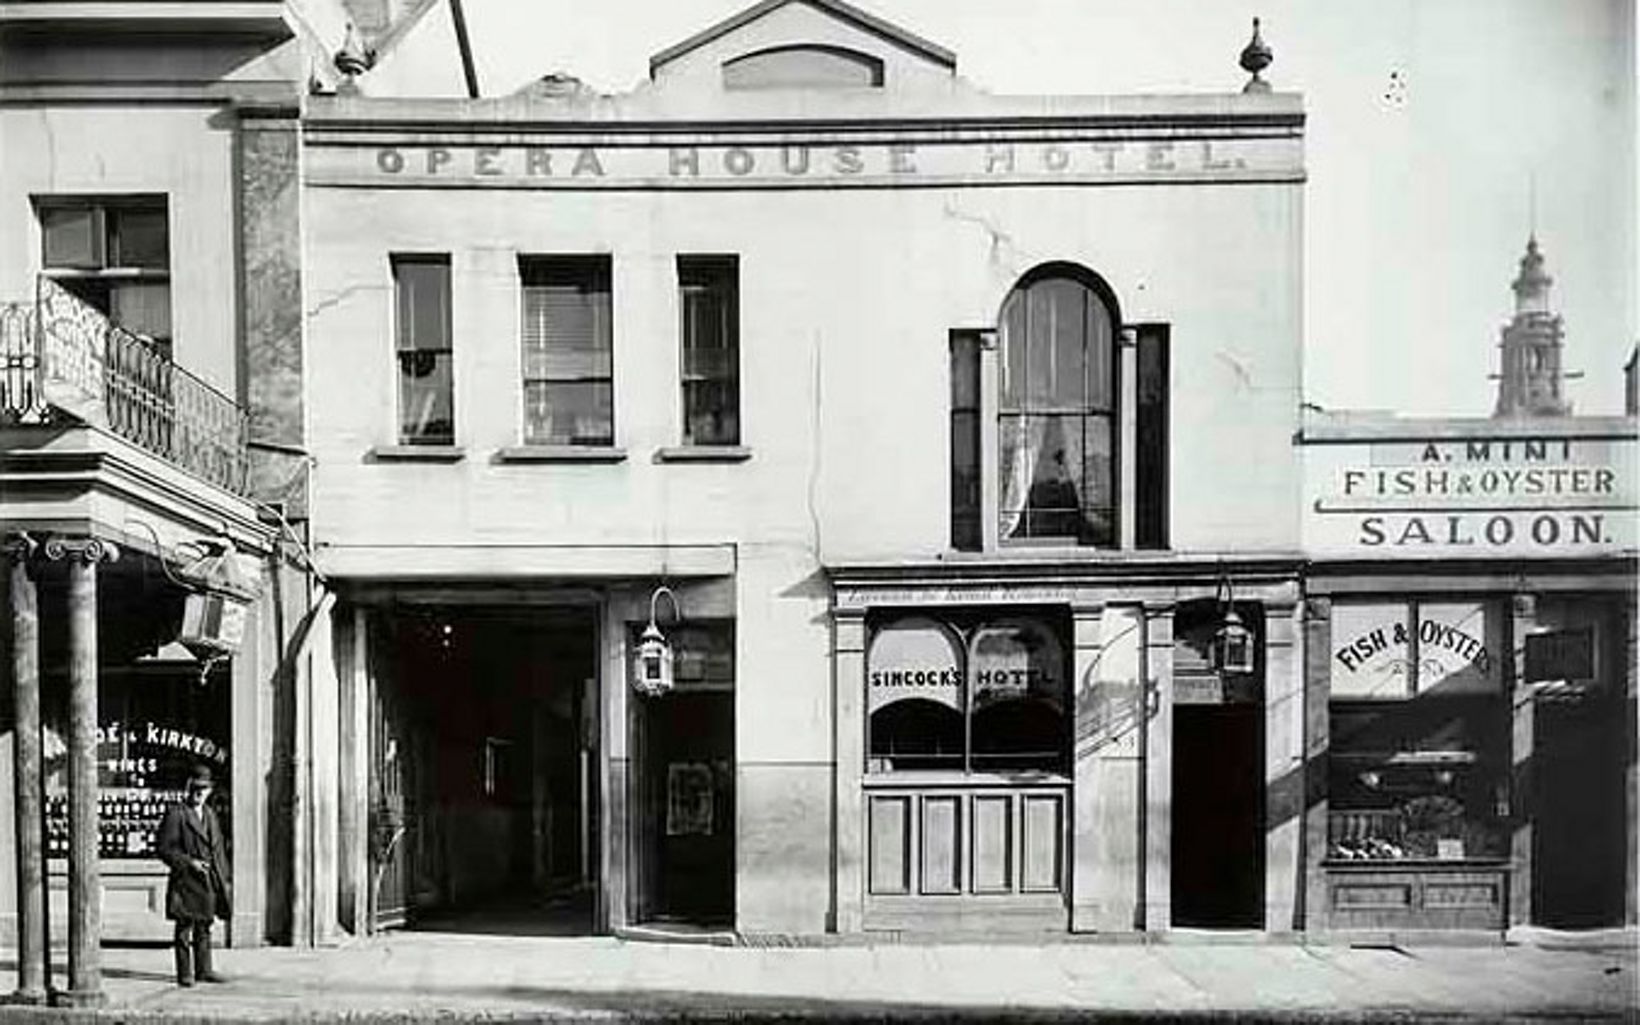 Oyster Saloon near the Opera House Hotel in Castlereagh Street © States Archives Records NSW